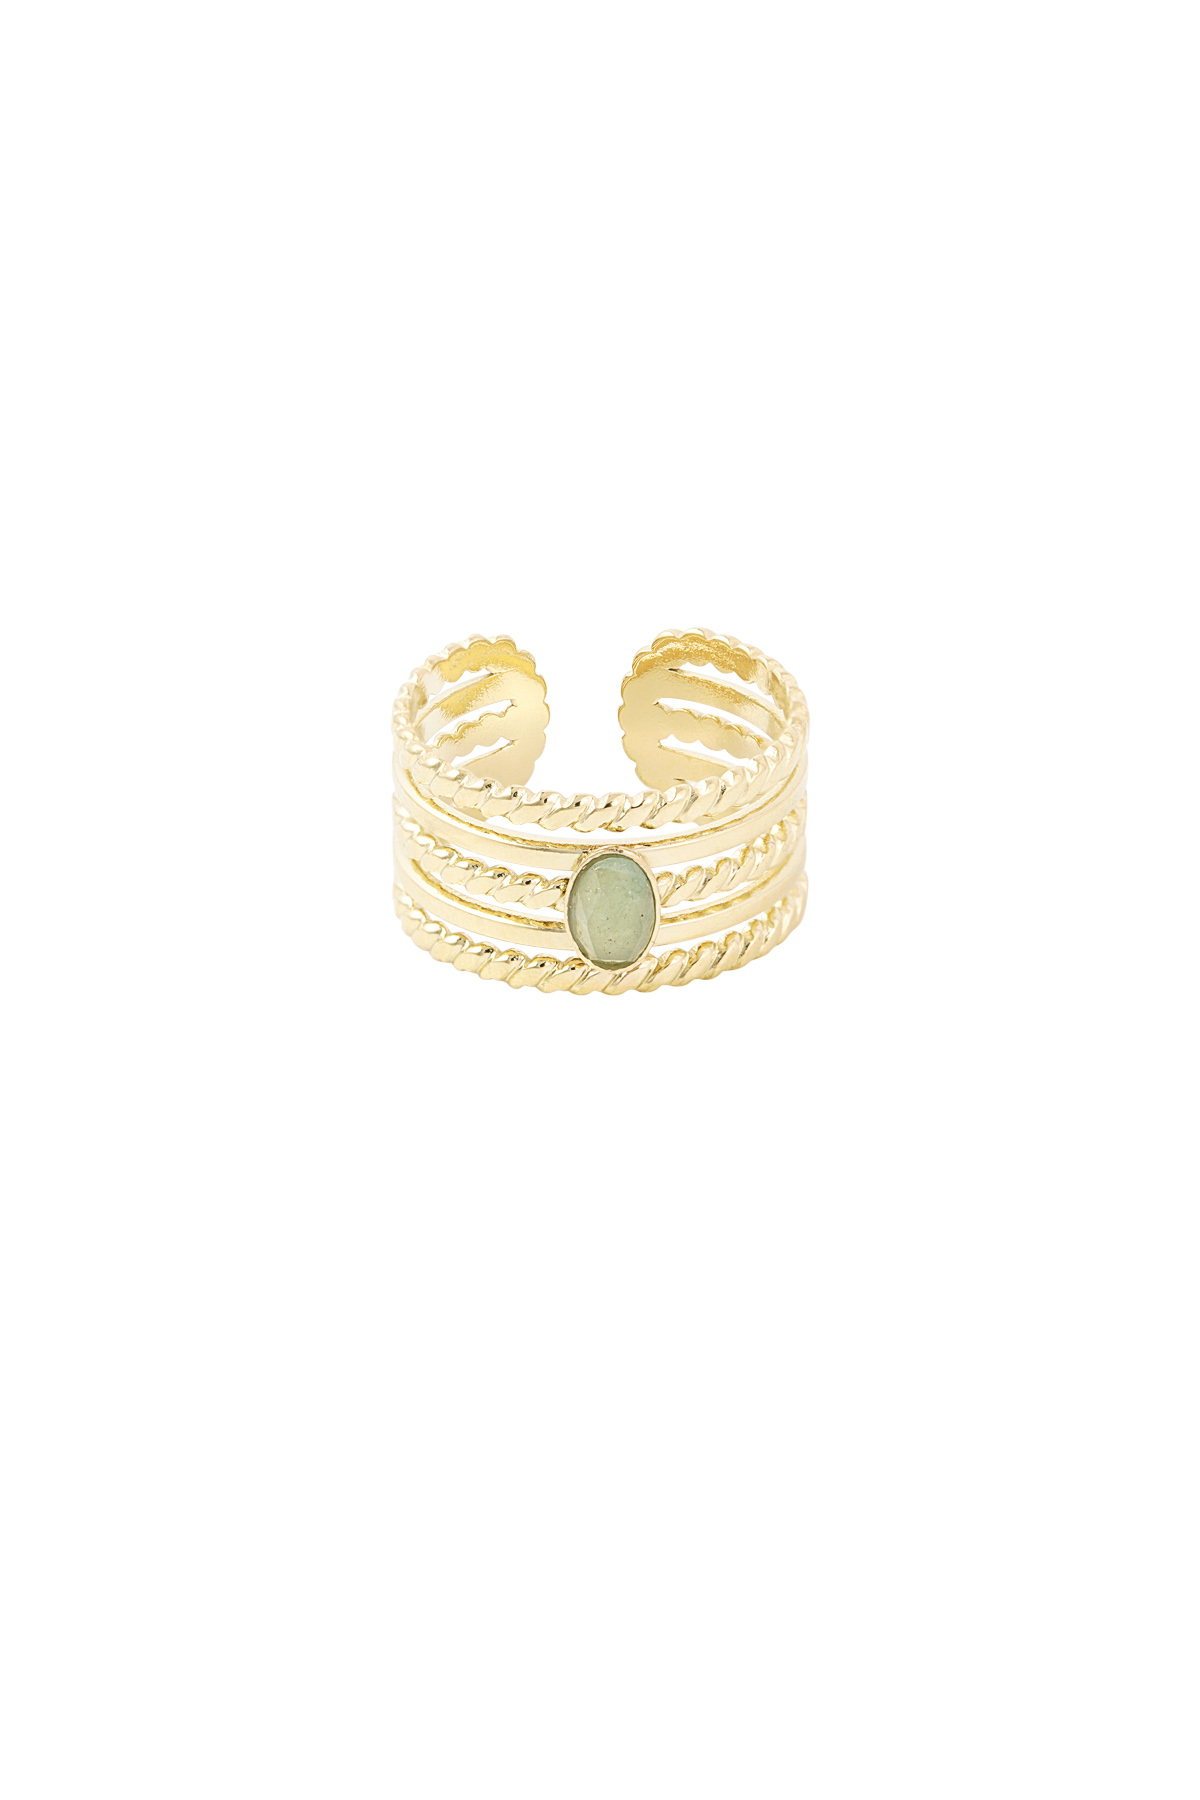 Ring with stone - green